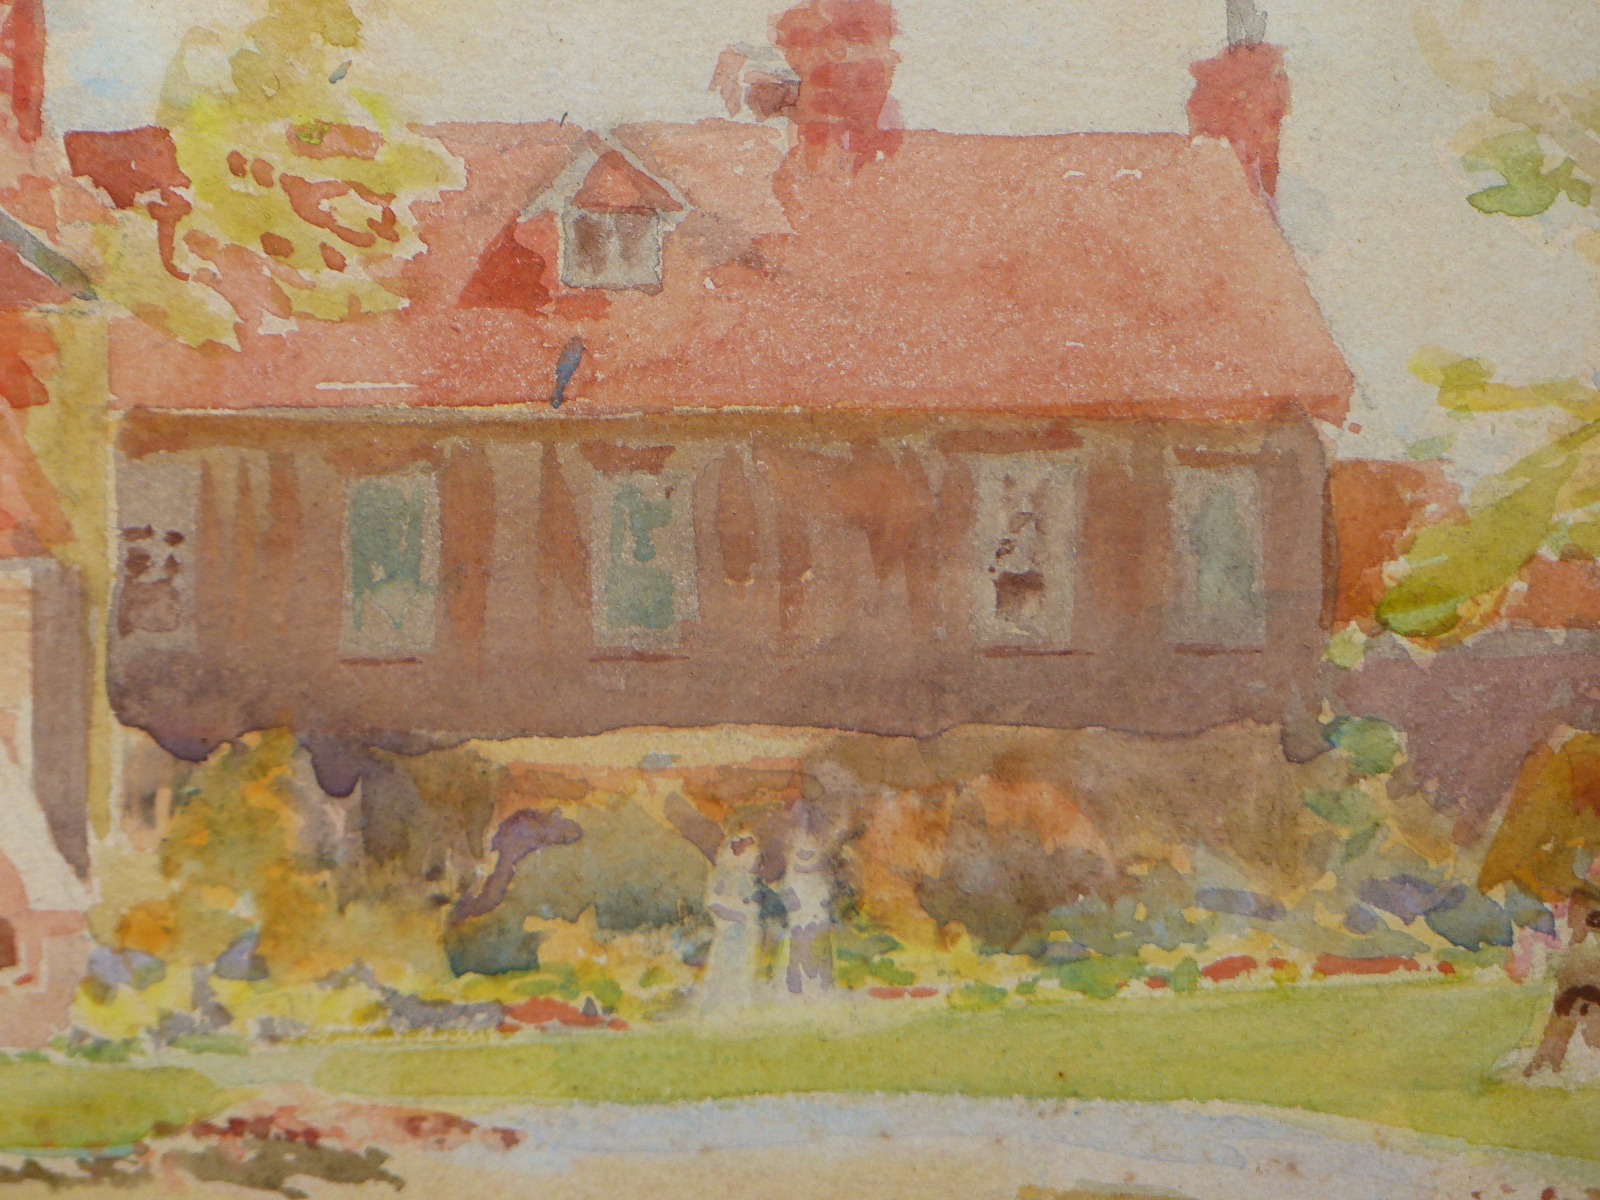 HARRY HINE (1845-1941), DOG LYING IN A SUMMER GARDEN, A HOUSE BEYOND, SIGNED, DATED 1895 AND - Image 5 of 7